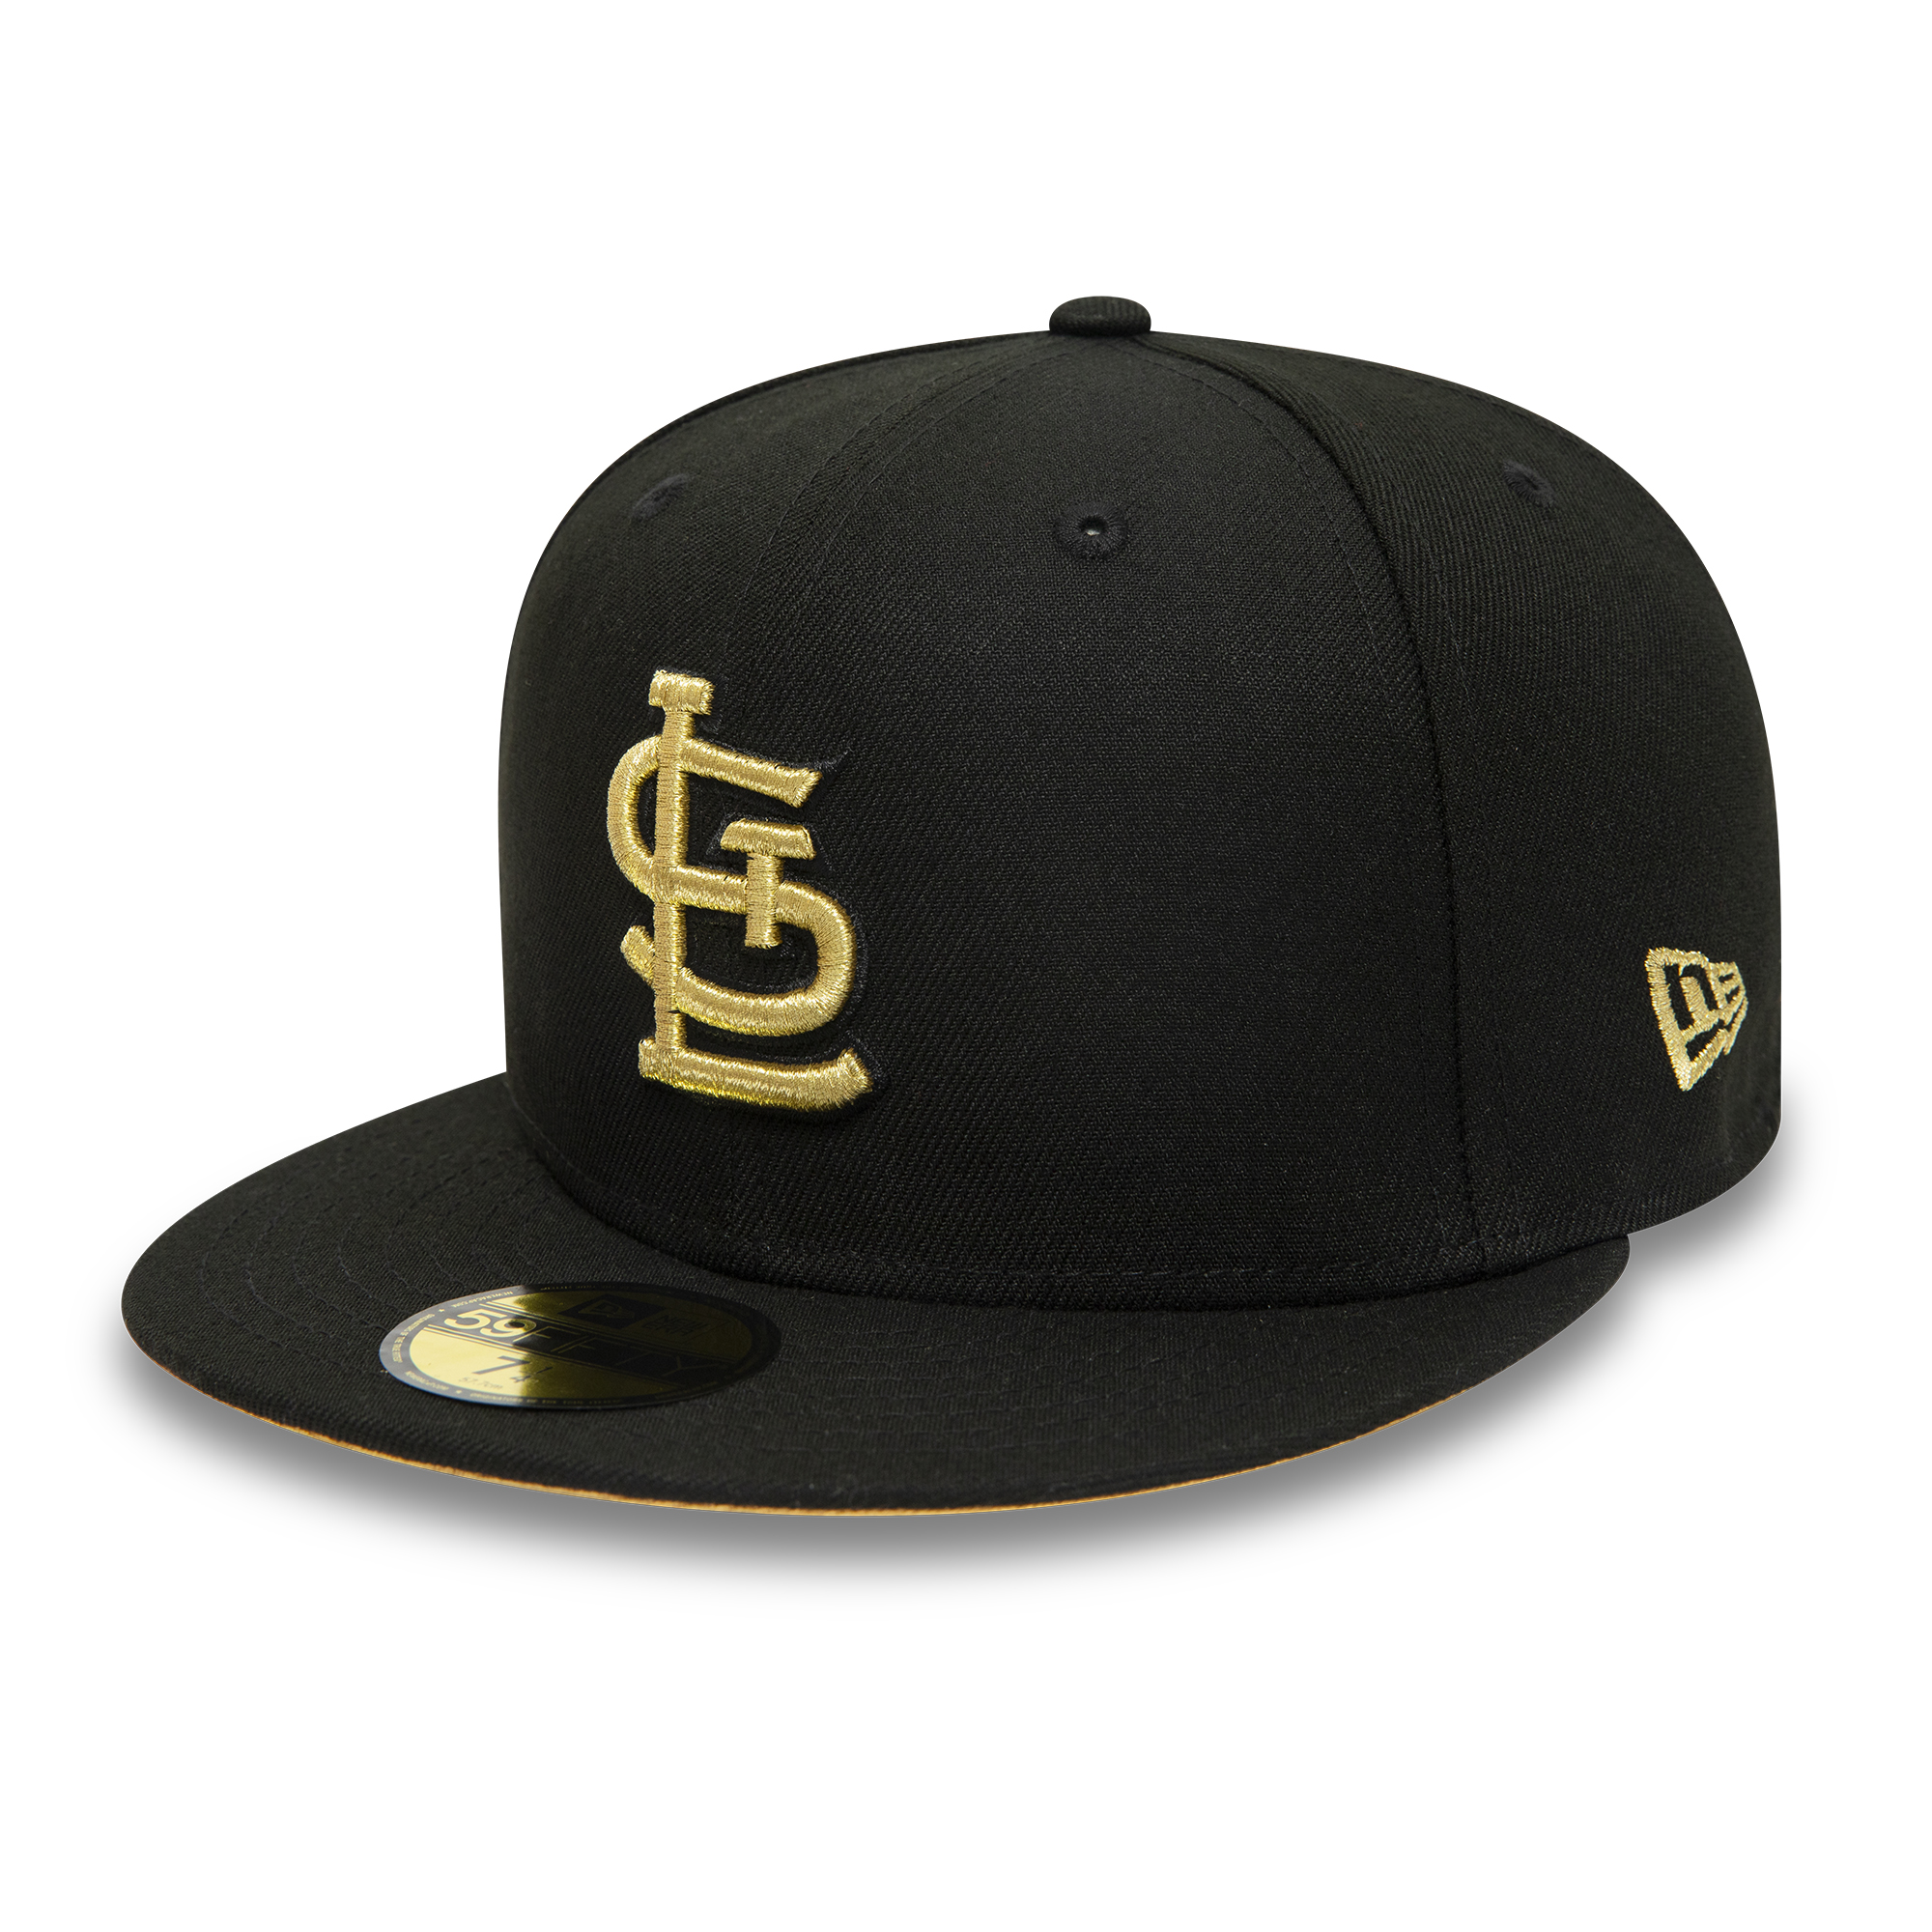 Official New Era St. Louis Cardinals MLB Black 59FIFTY Fitted Cap B8207 ...